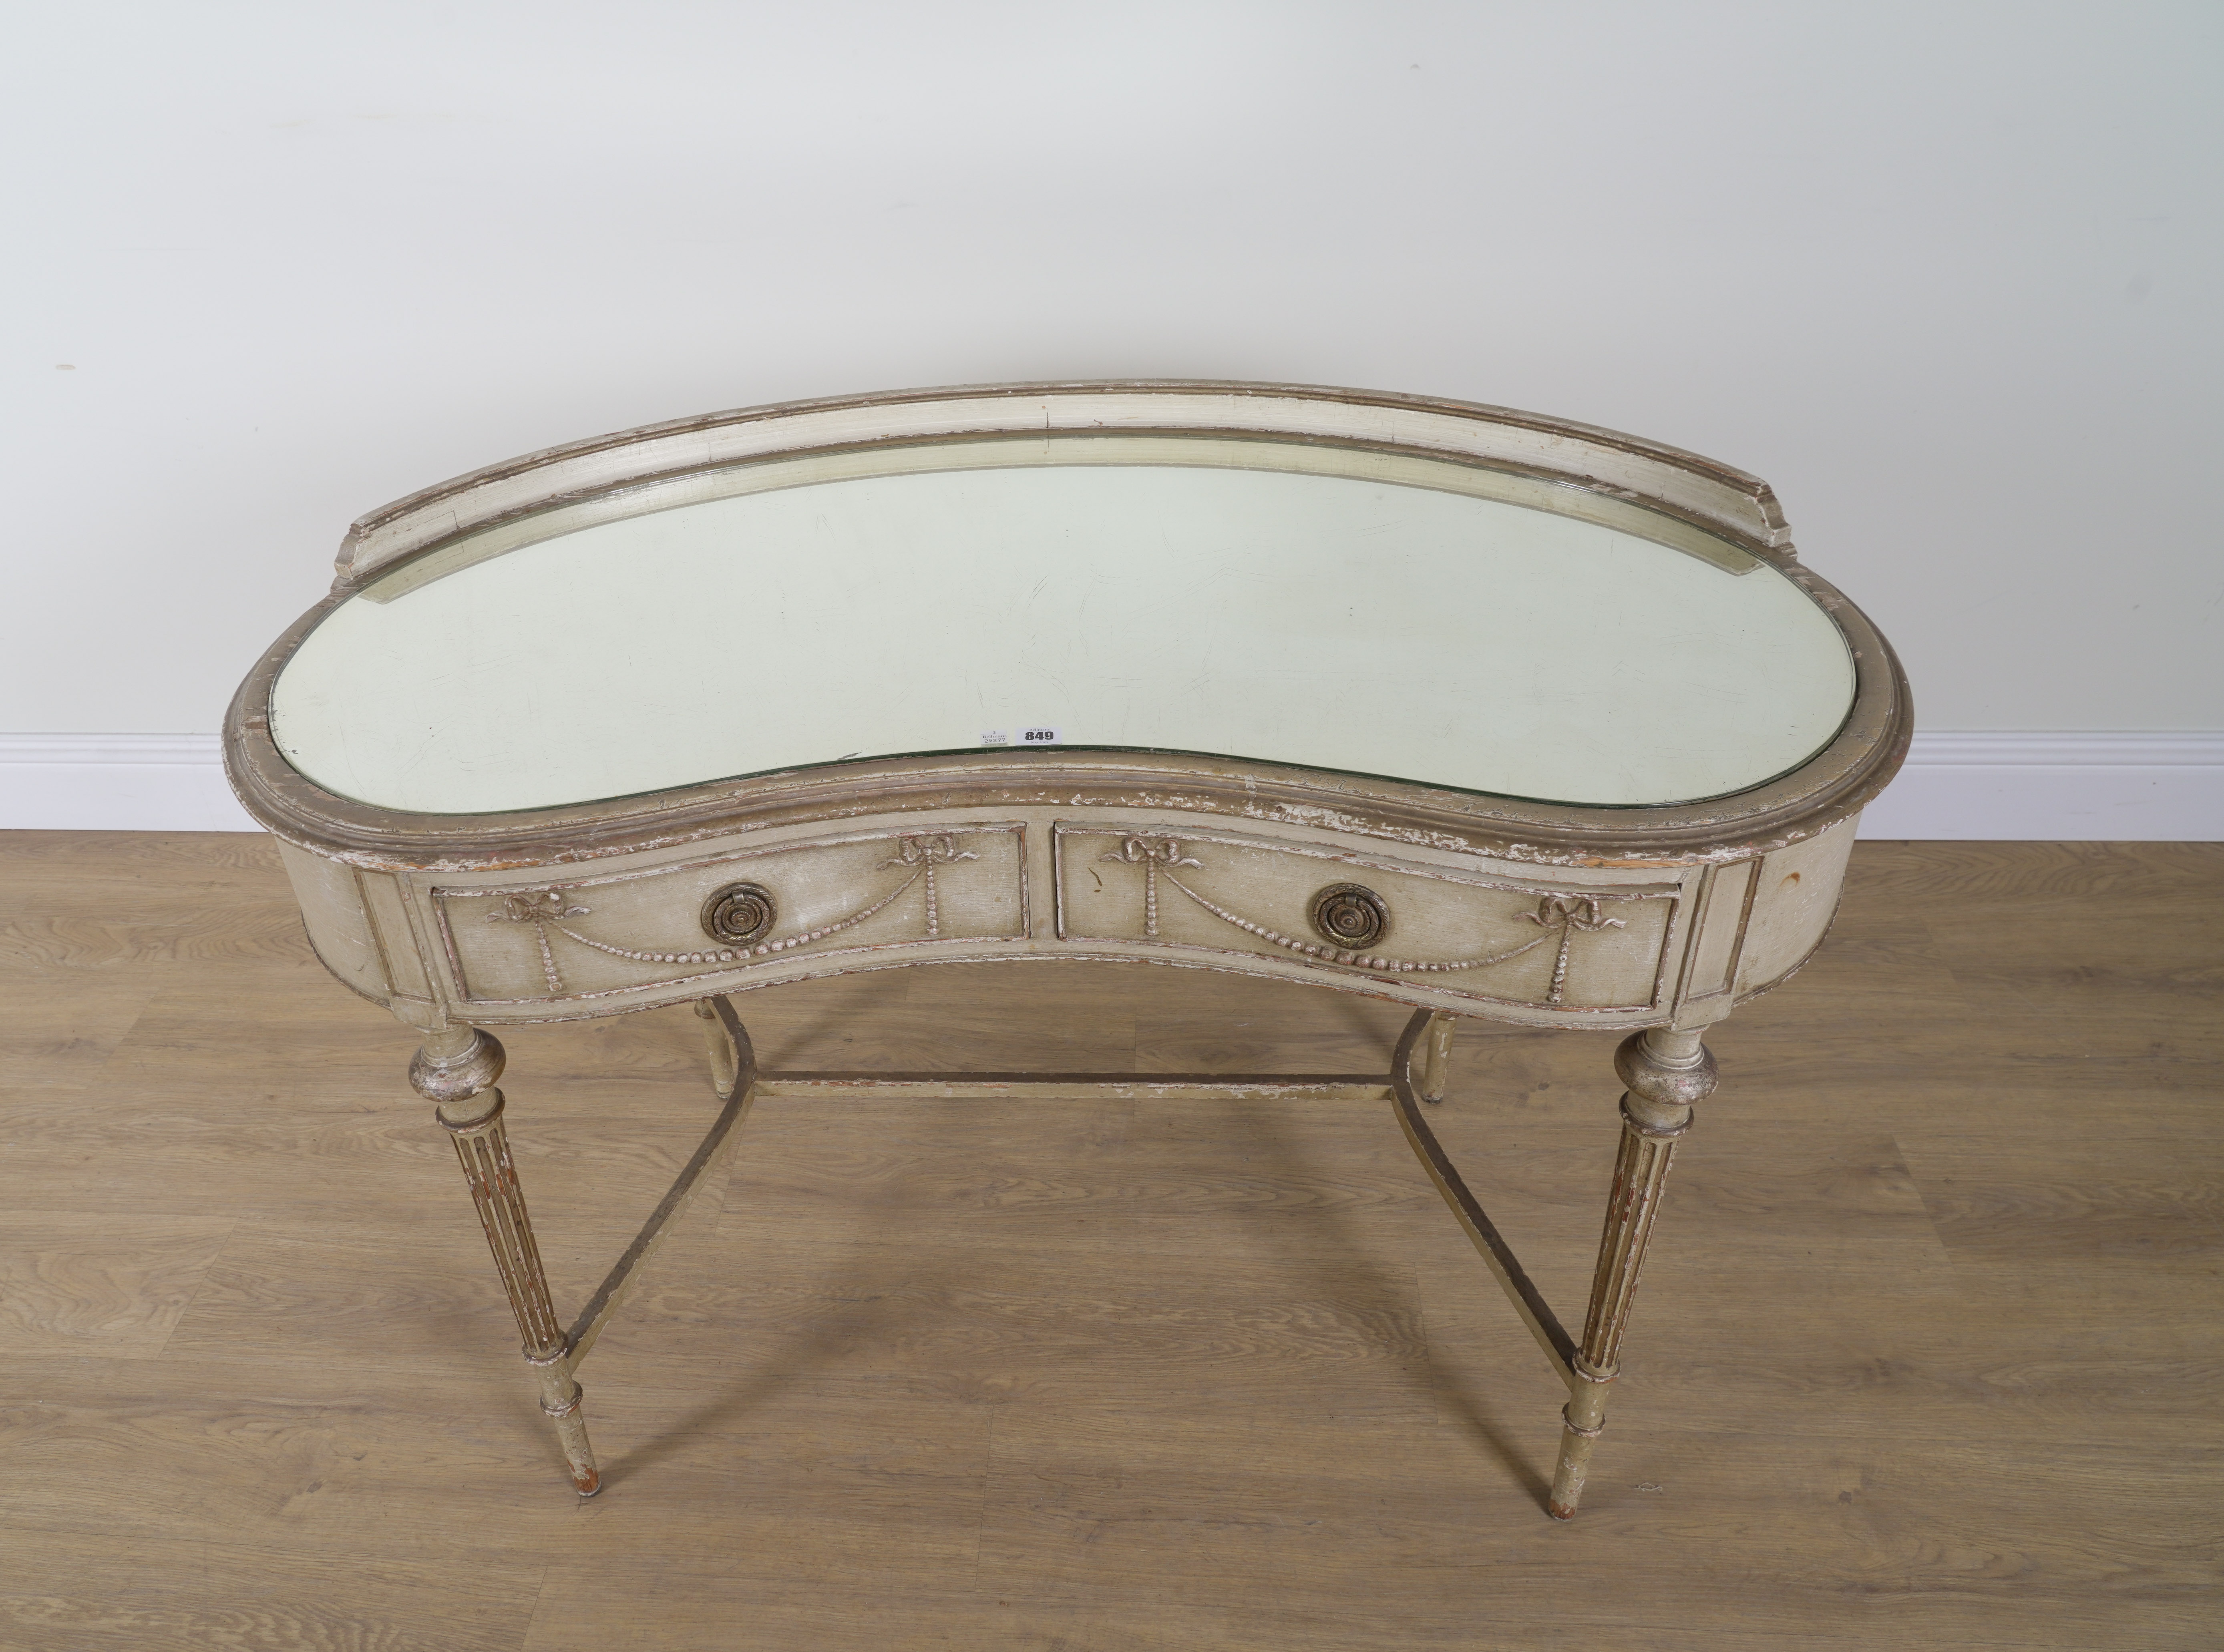 AN EARLY 20TH CENTURY SILVER PAINTED KIDNEY SHAPED DRESSING TABLE - Image 2 of 3